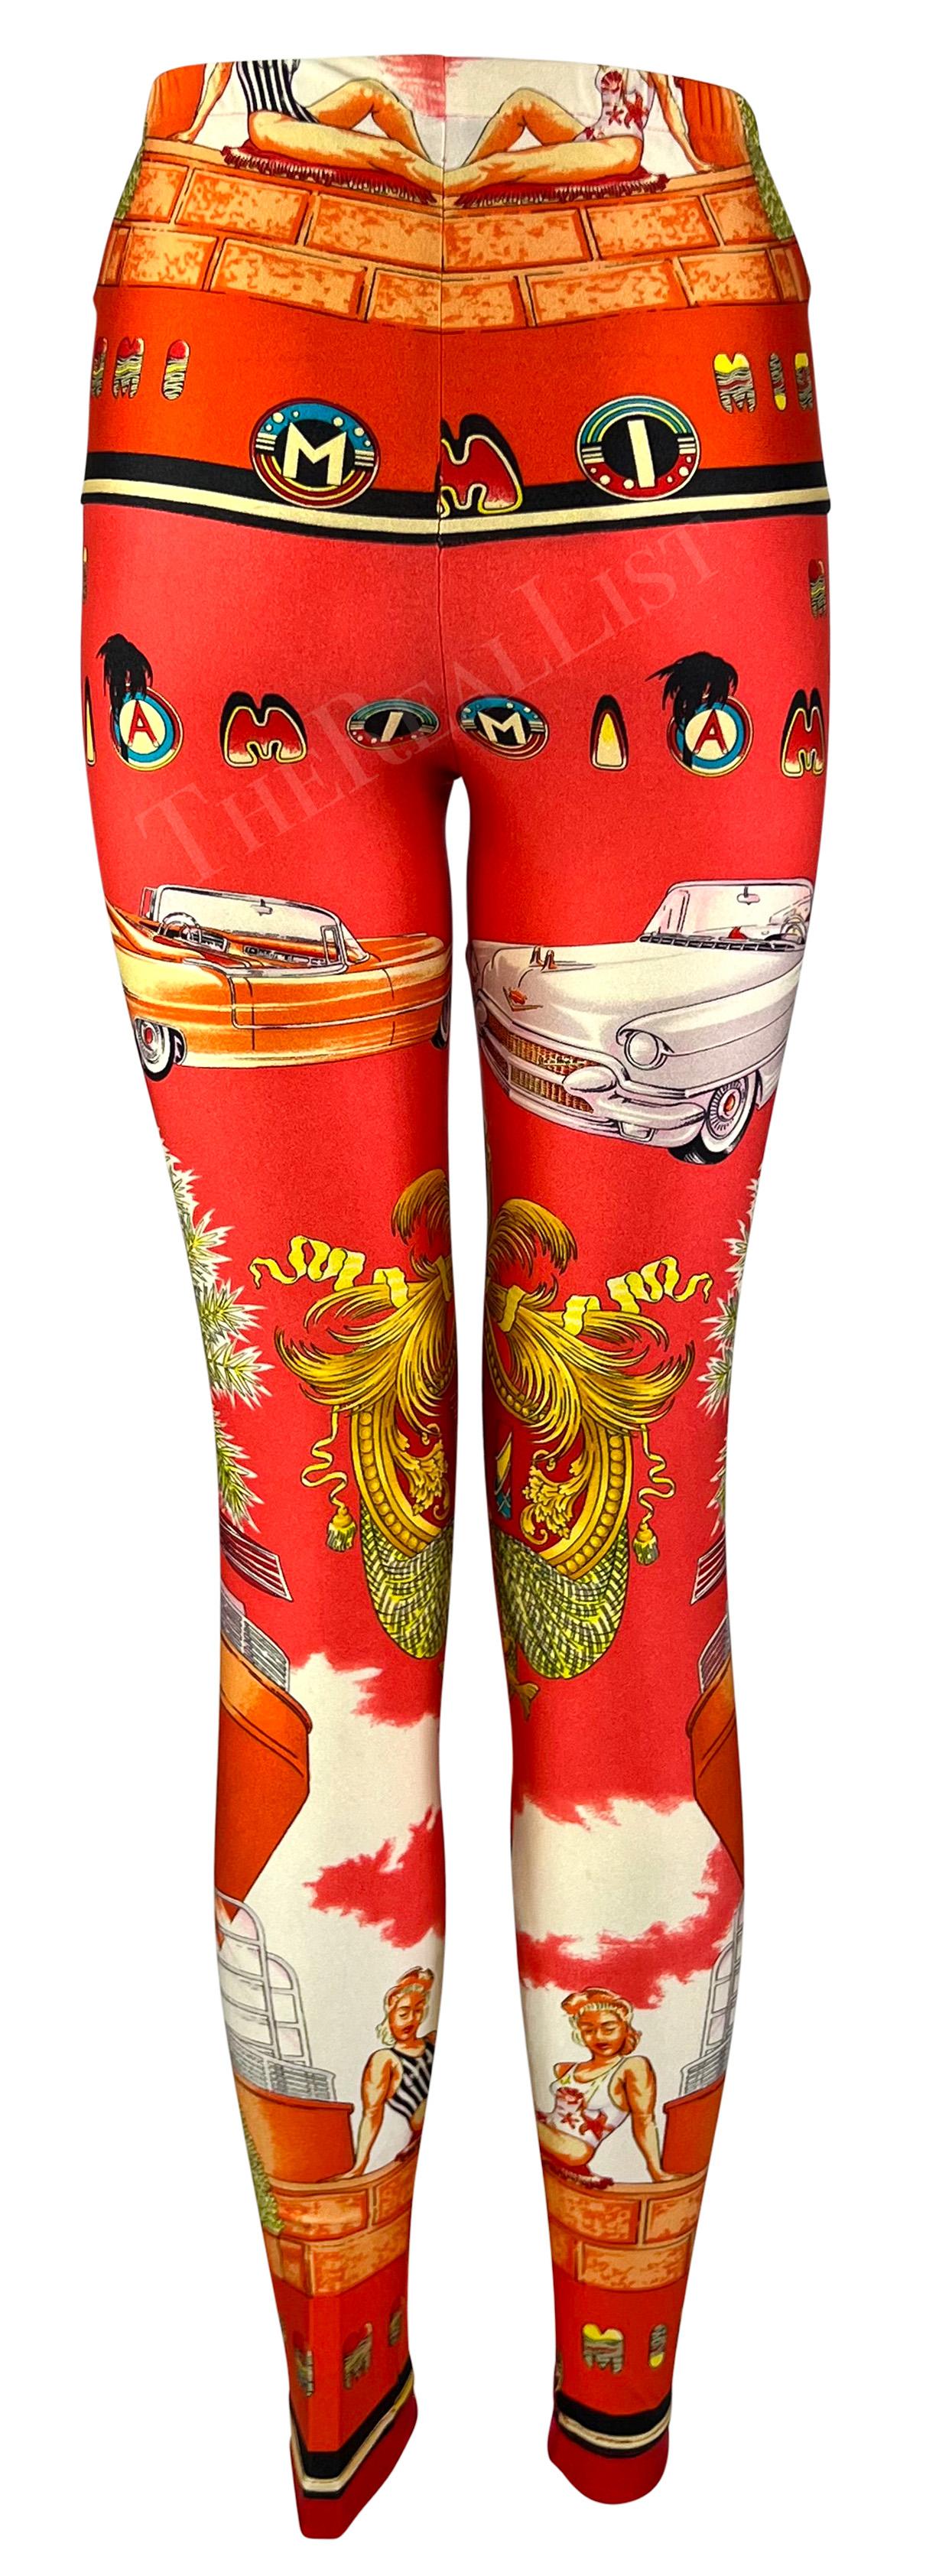 S/S 1993 Gianni Versace South Beach Miami Sunset Orange Red Florida Print Tights For Sale 2